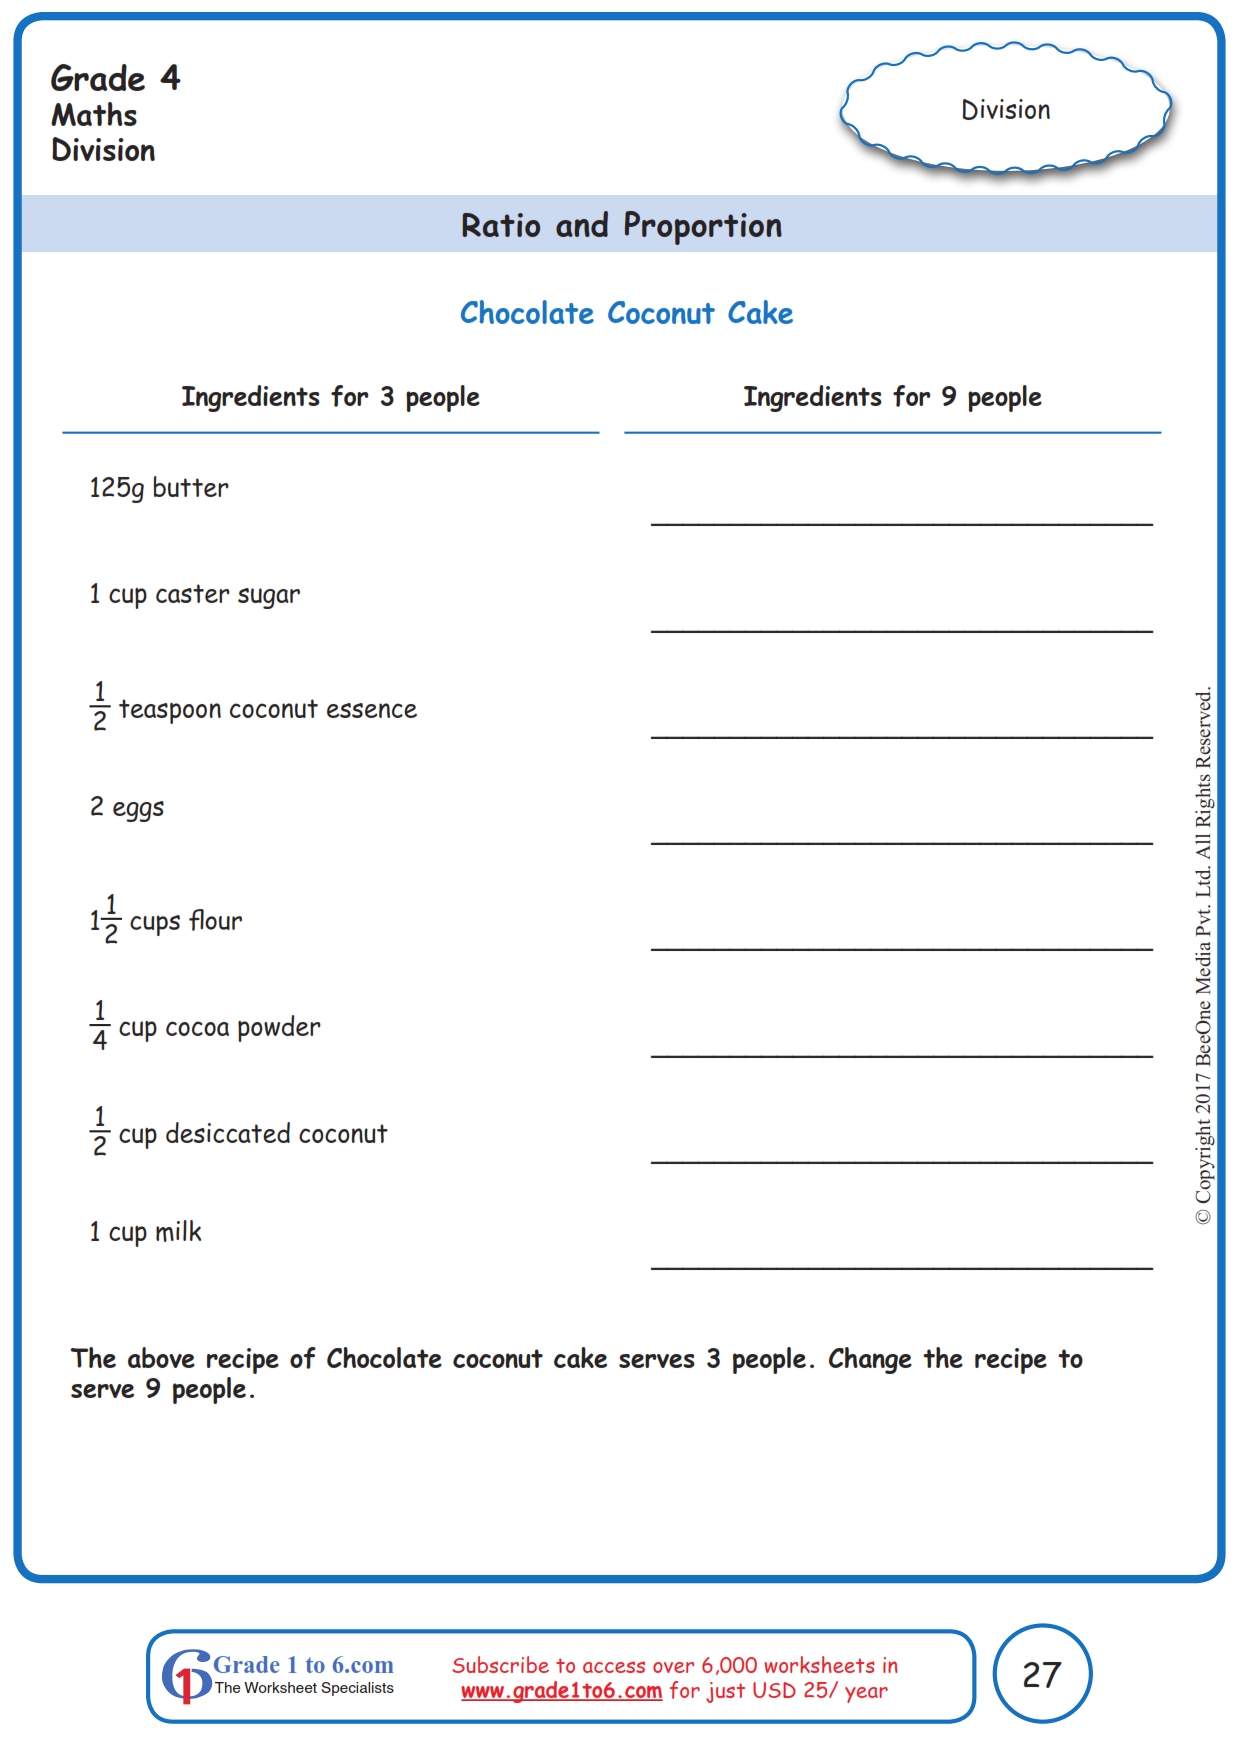 Grade 20 Ratio & Proportion Worksheetswww.grade20to20.com For Ratios And Rates Worksheet